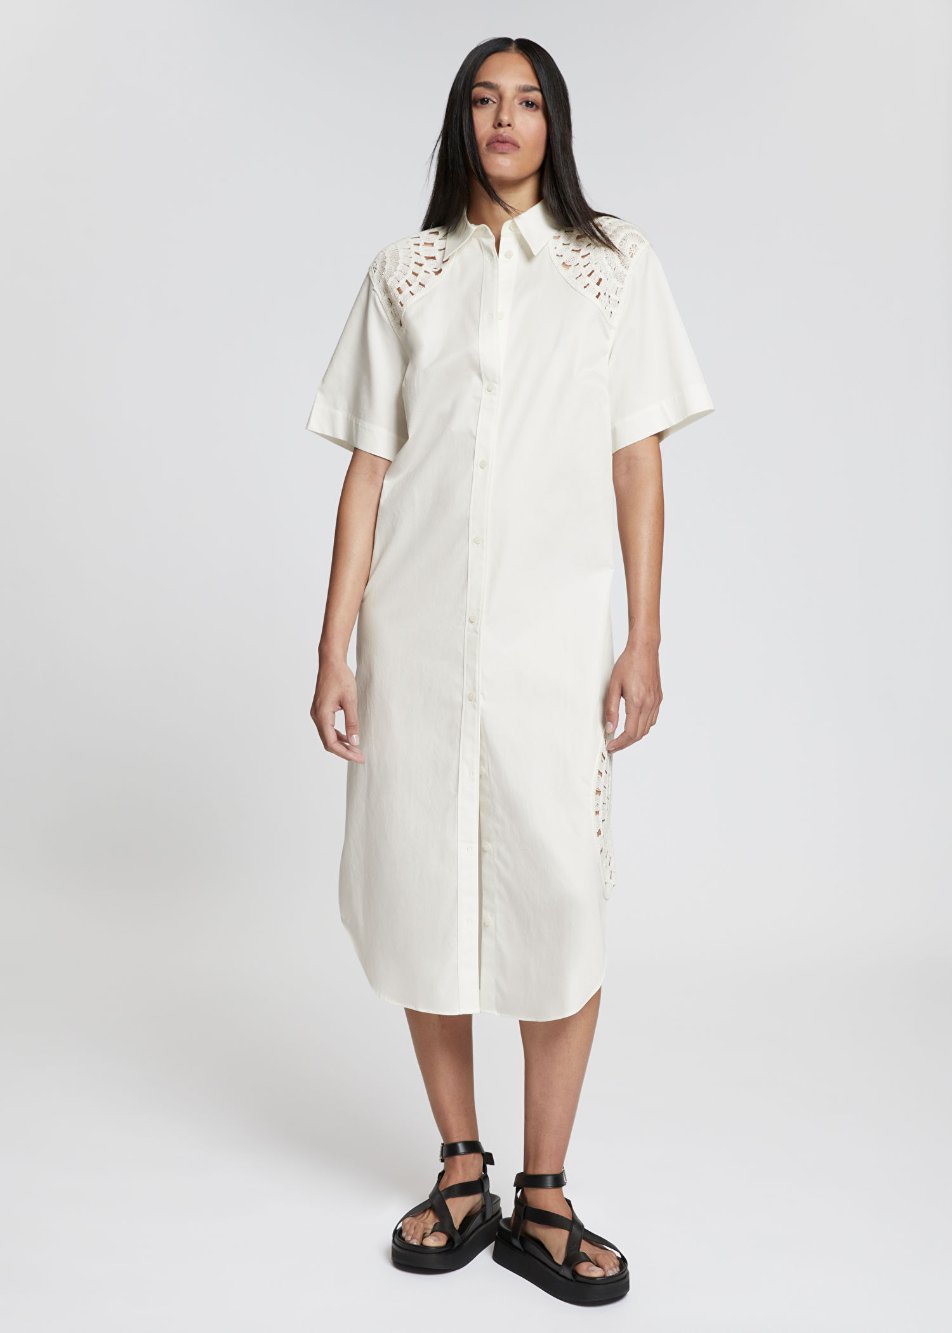 Robes chemises blanches pour femme